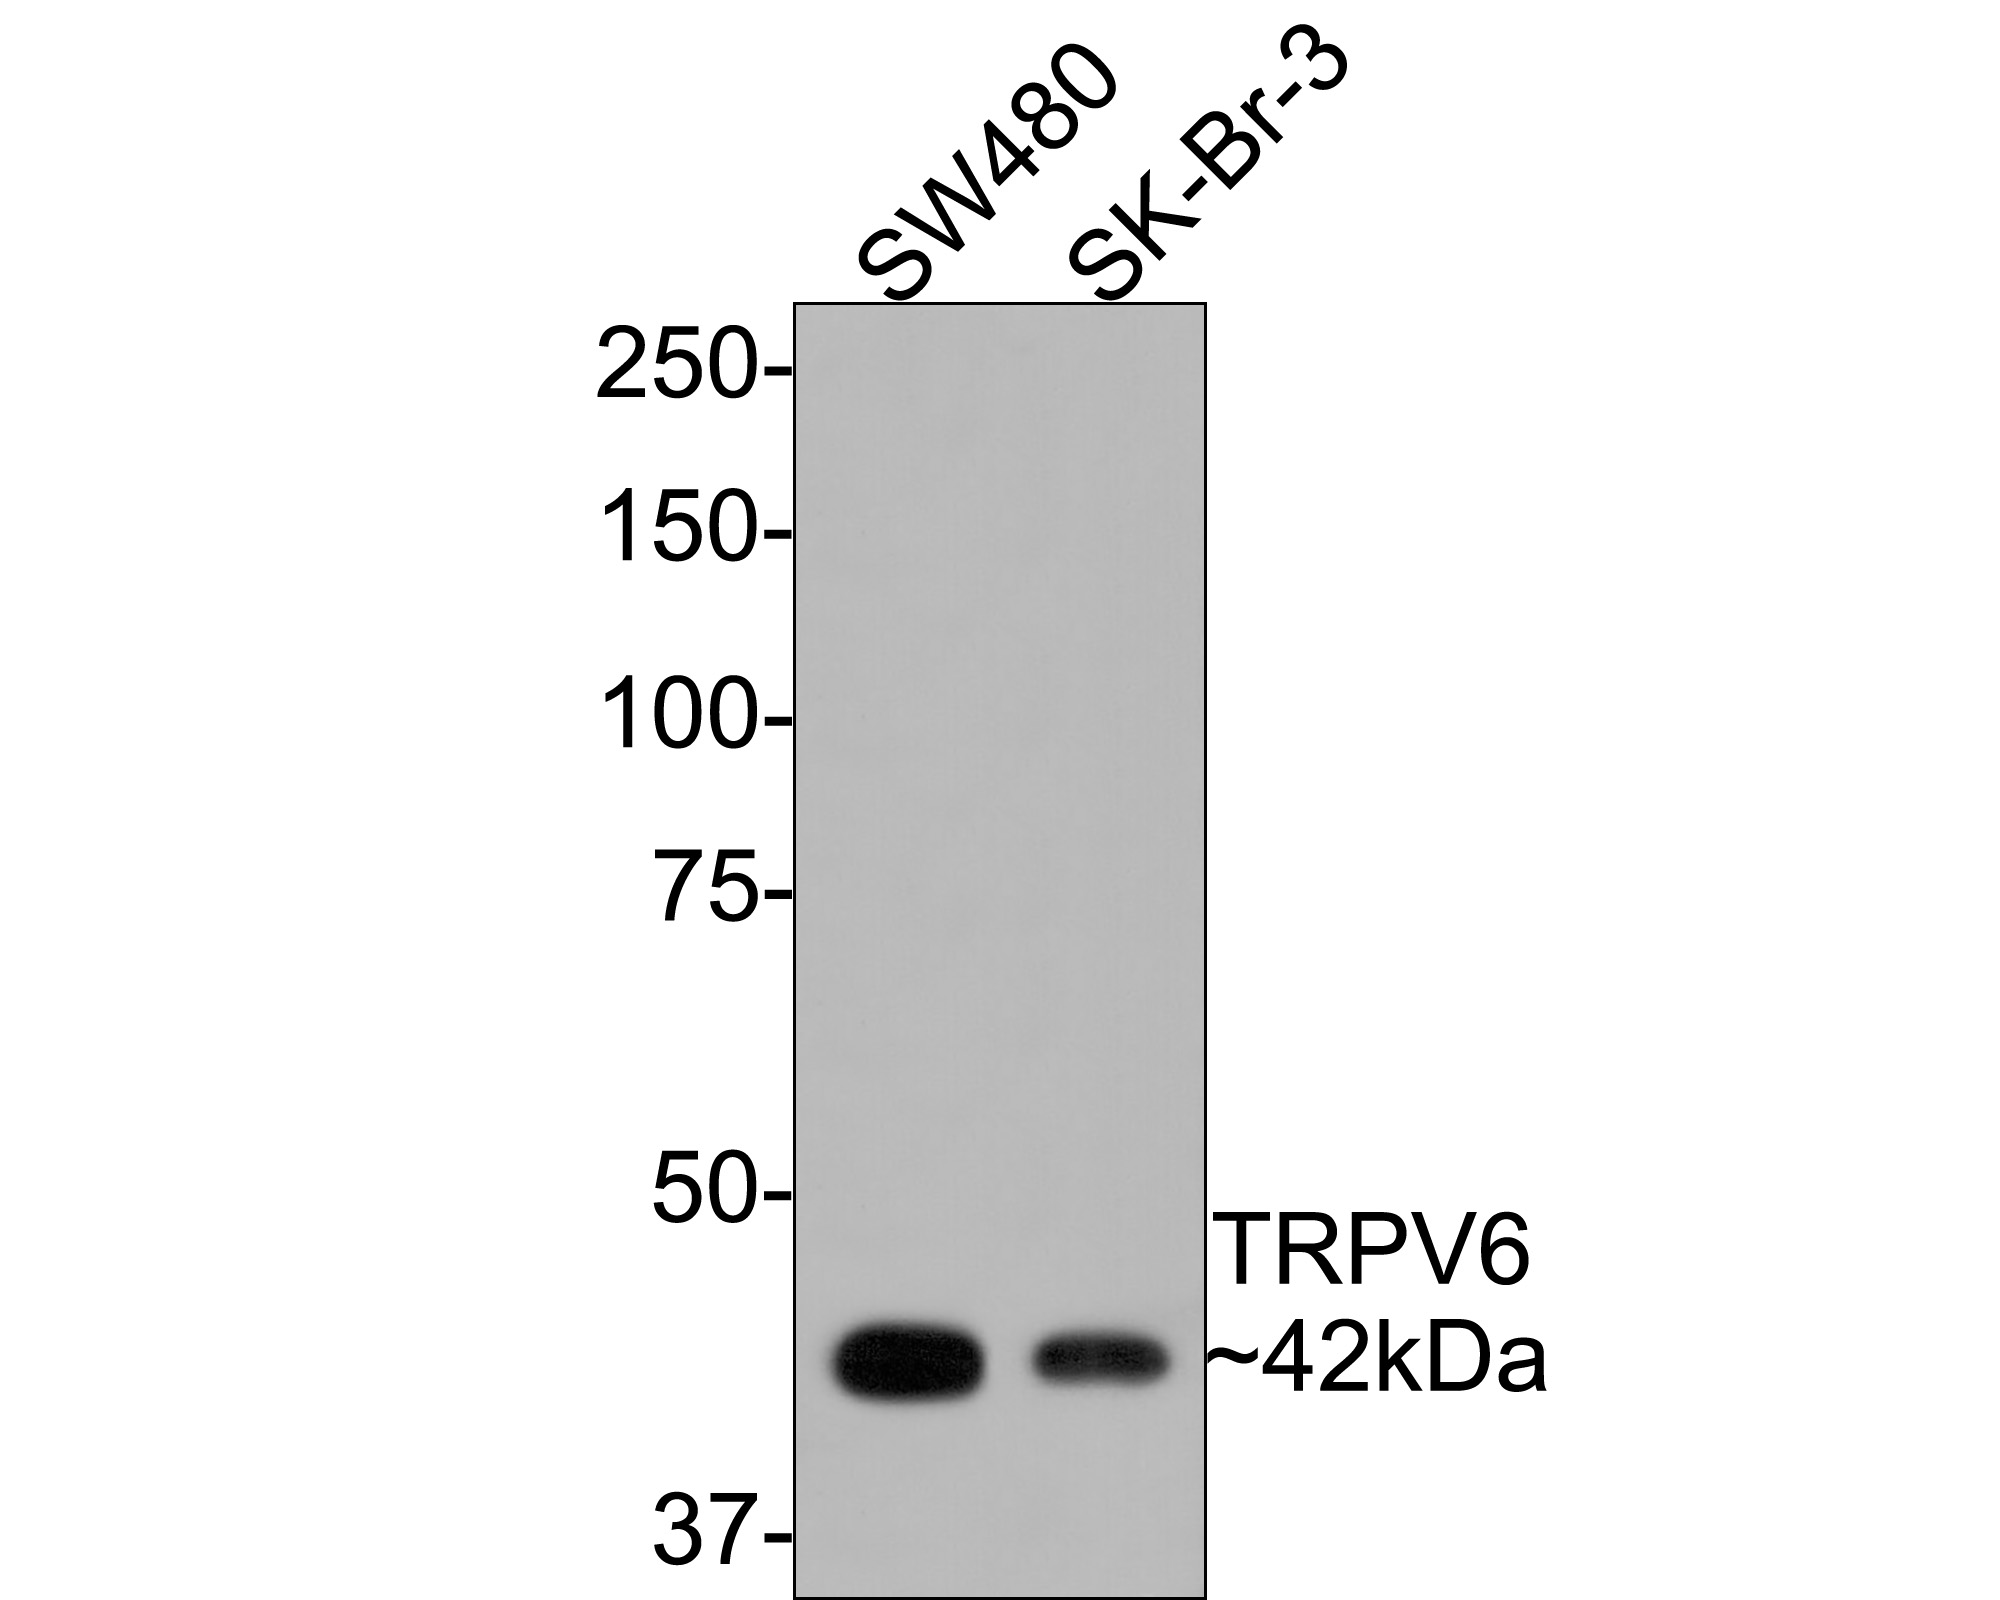 Western blot analysis of TRPV6 on different lysates with Rabbit anti-TRPV6 antibody (HA500333) at 1/500 dilution.<br />
<br />
Lane 1: SW480 cell lysate<br />
Lane 2: SK-Br-3 cell lysate<br />
<br />
Lysates/proteins at 10 µg/Lane.<br />
<br />
Predicted band size: 87 kDa<br />
Observed band size: 42 kDa (unglycosylated monomeric form of TRPV6)<br />
<br />
Exposure time: 30 seconds;<br />
<br />
8% SDS-PAGE gel.<br />
<br />
Proteins were transferred to a PVDF membrane and blocked with 5% NFDM/TBST for 1 hour at room temperature. The primary antibody (HA500333) at 1/500 dilution was used in 5% NFDM/TBST at room temperature for 2 hours. Goat Anti-Rabbit IgG - HRP Secondary Antibody (HA1001) at 1:300,000 dilution was used for 1 hour at room temperature.